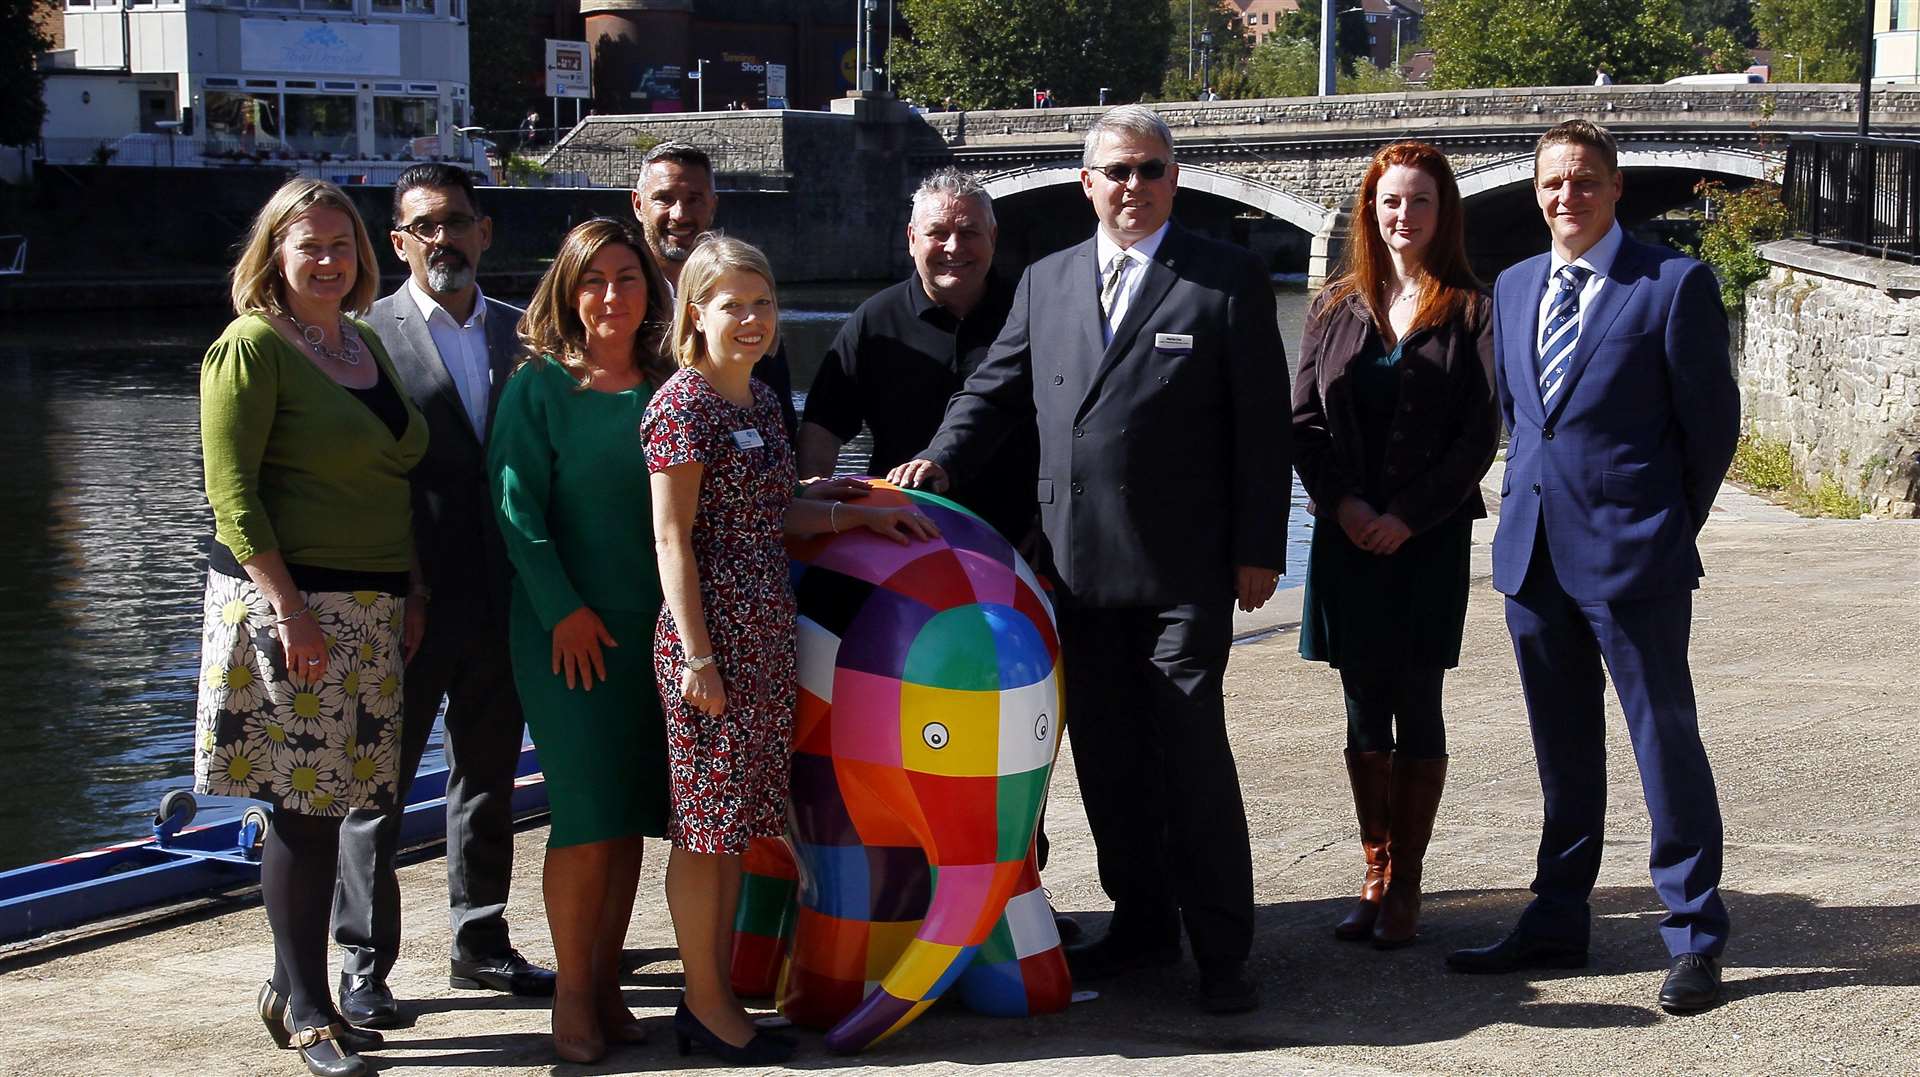 Elmer the Elephant Art Trail coming to Maidstone in 2020 organised by Heart of Kent Hospice.Official partners, Ann-Marie Kelly, Dean Hoppers, Lyndsey Gallagher, Ian Savage, Sarah Pugh, David Boughton, Martin Cox, Ilsa Butler and James Emson